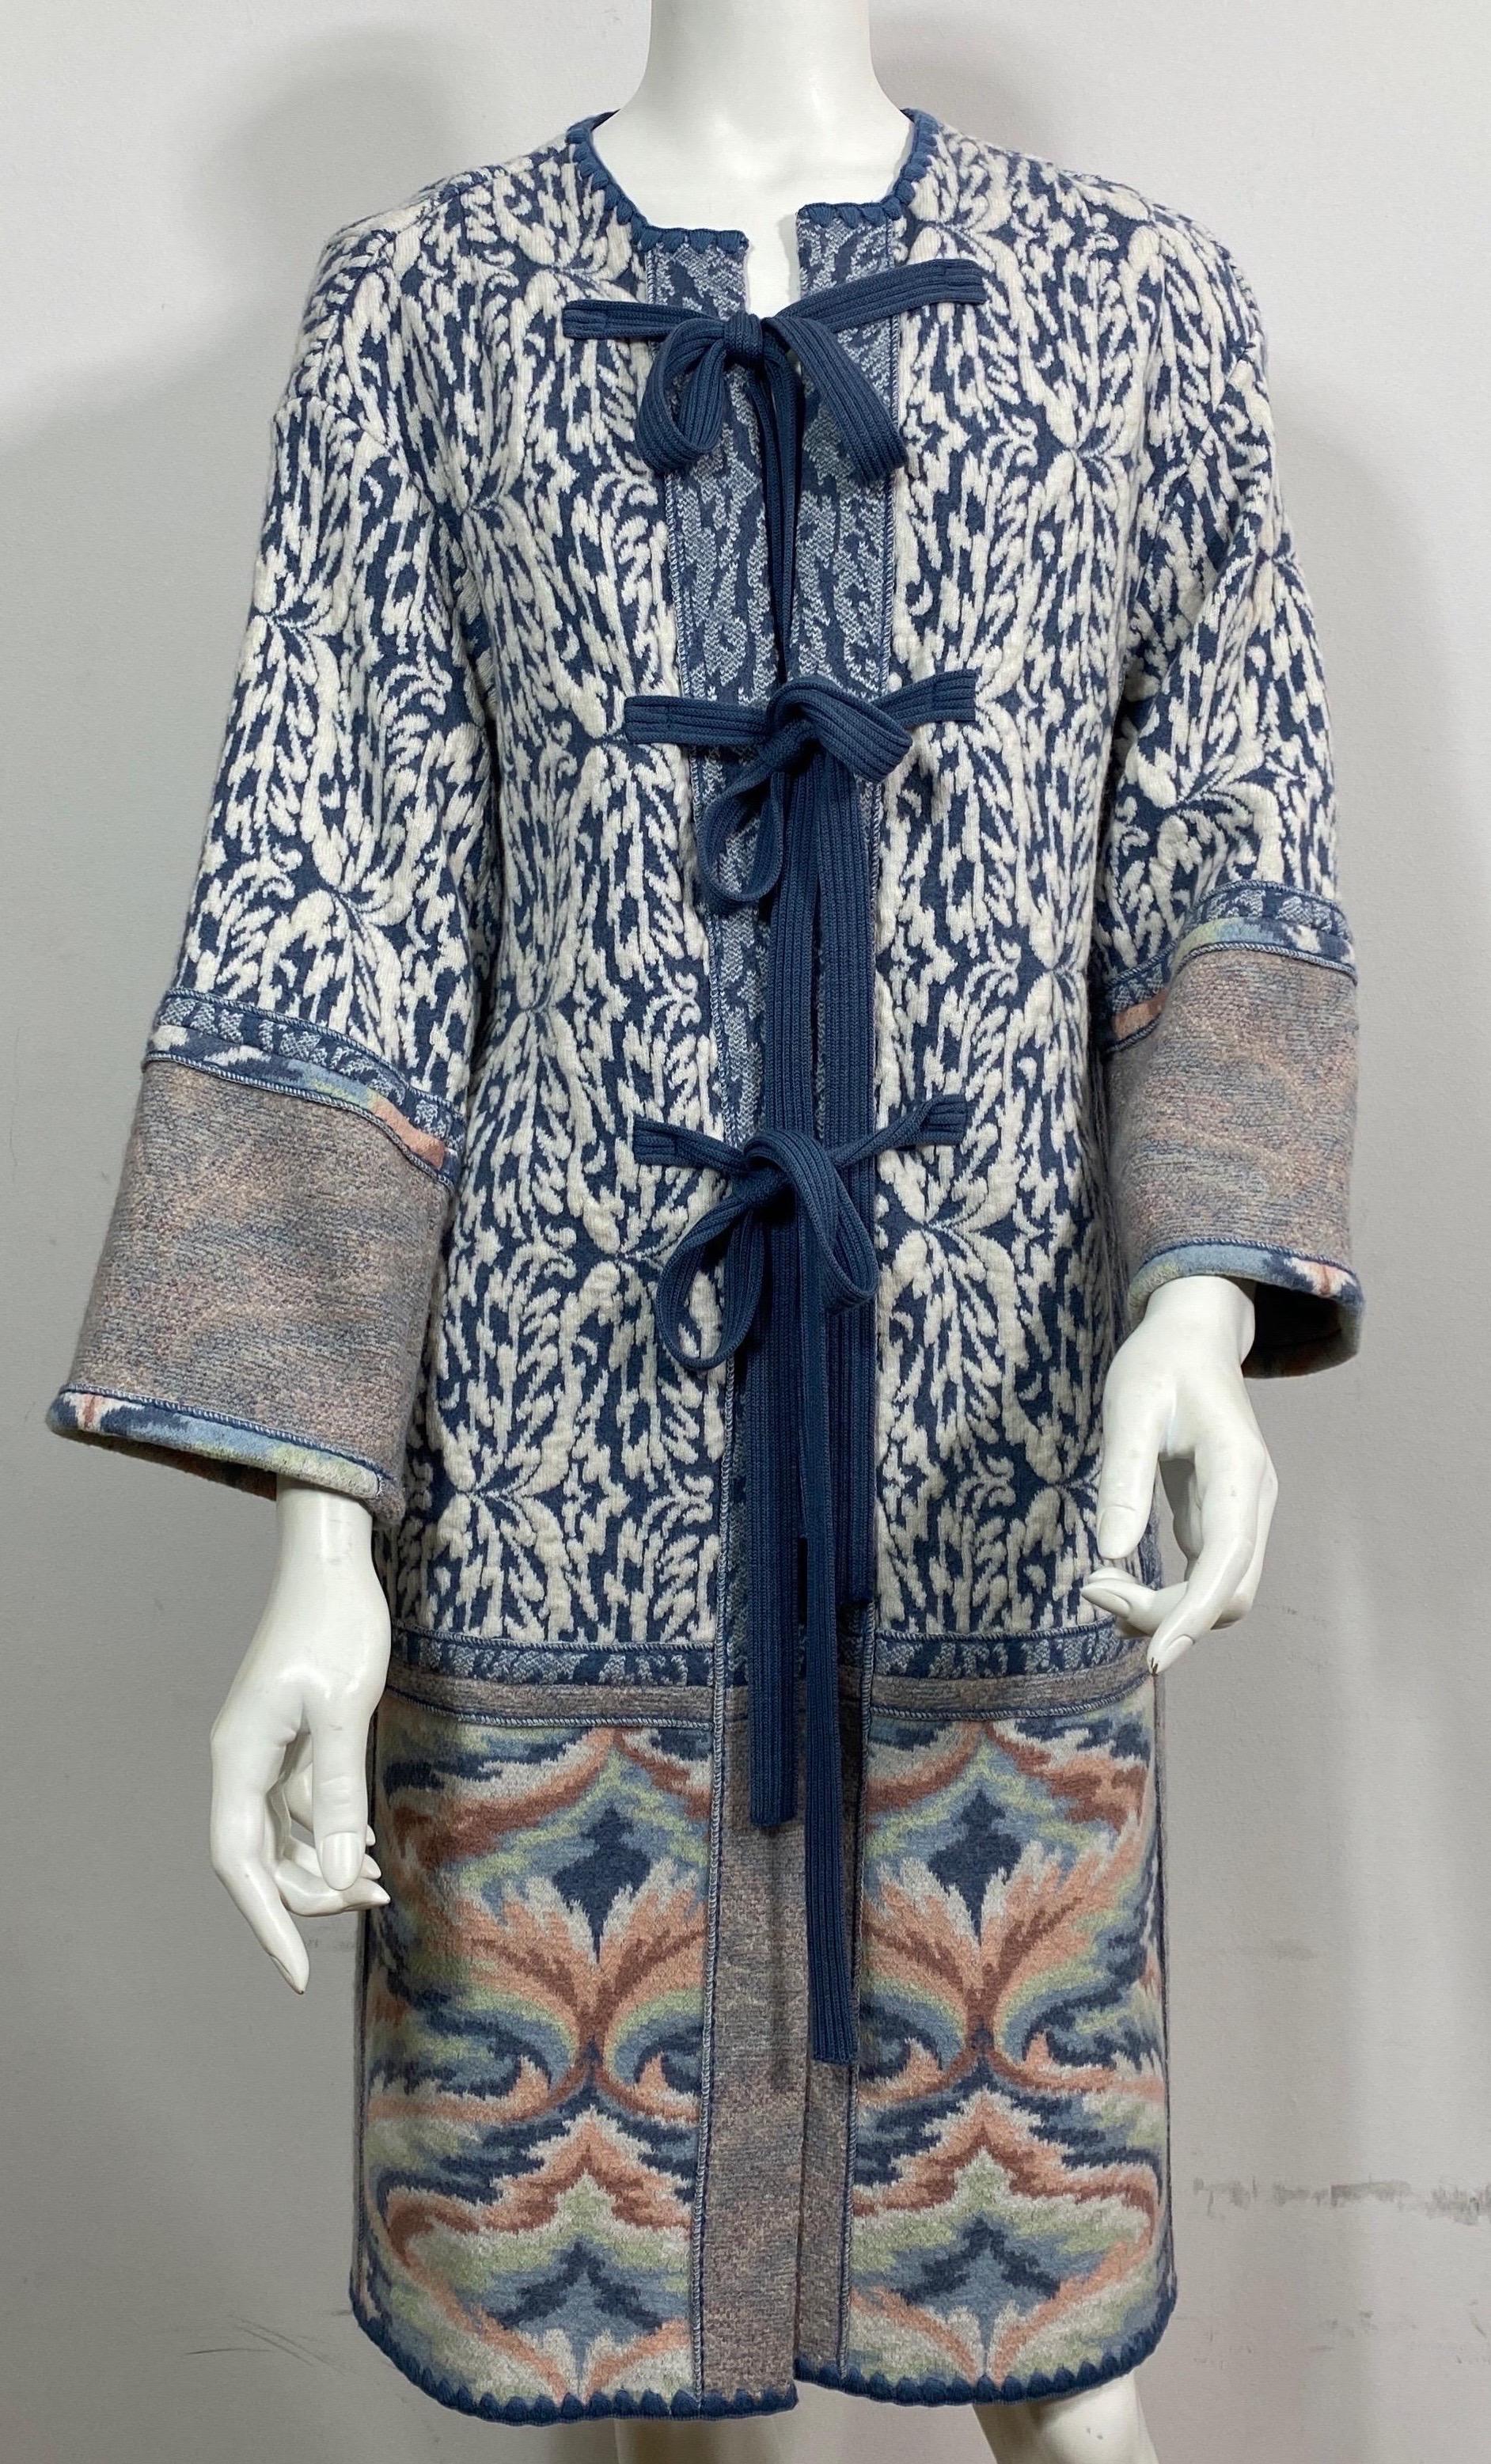 Missoni Blue and Cream Wool Knit Sweater Coat - Size Small/Medium In Excellent Condition For Sale In West Palm Beach, FL